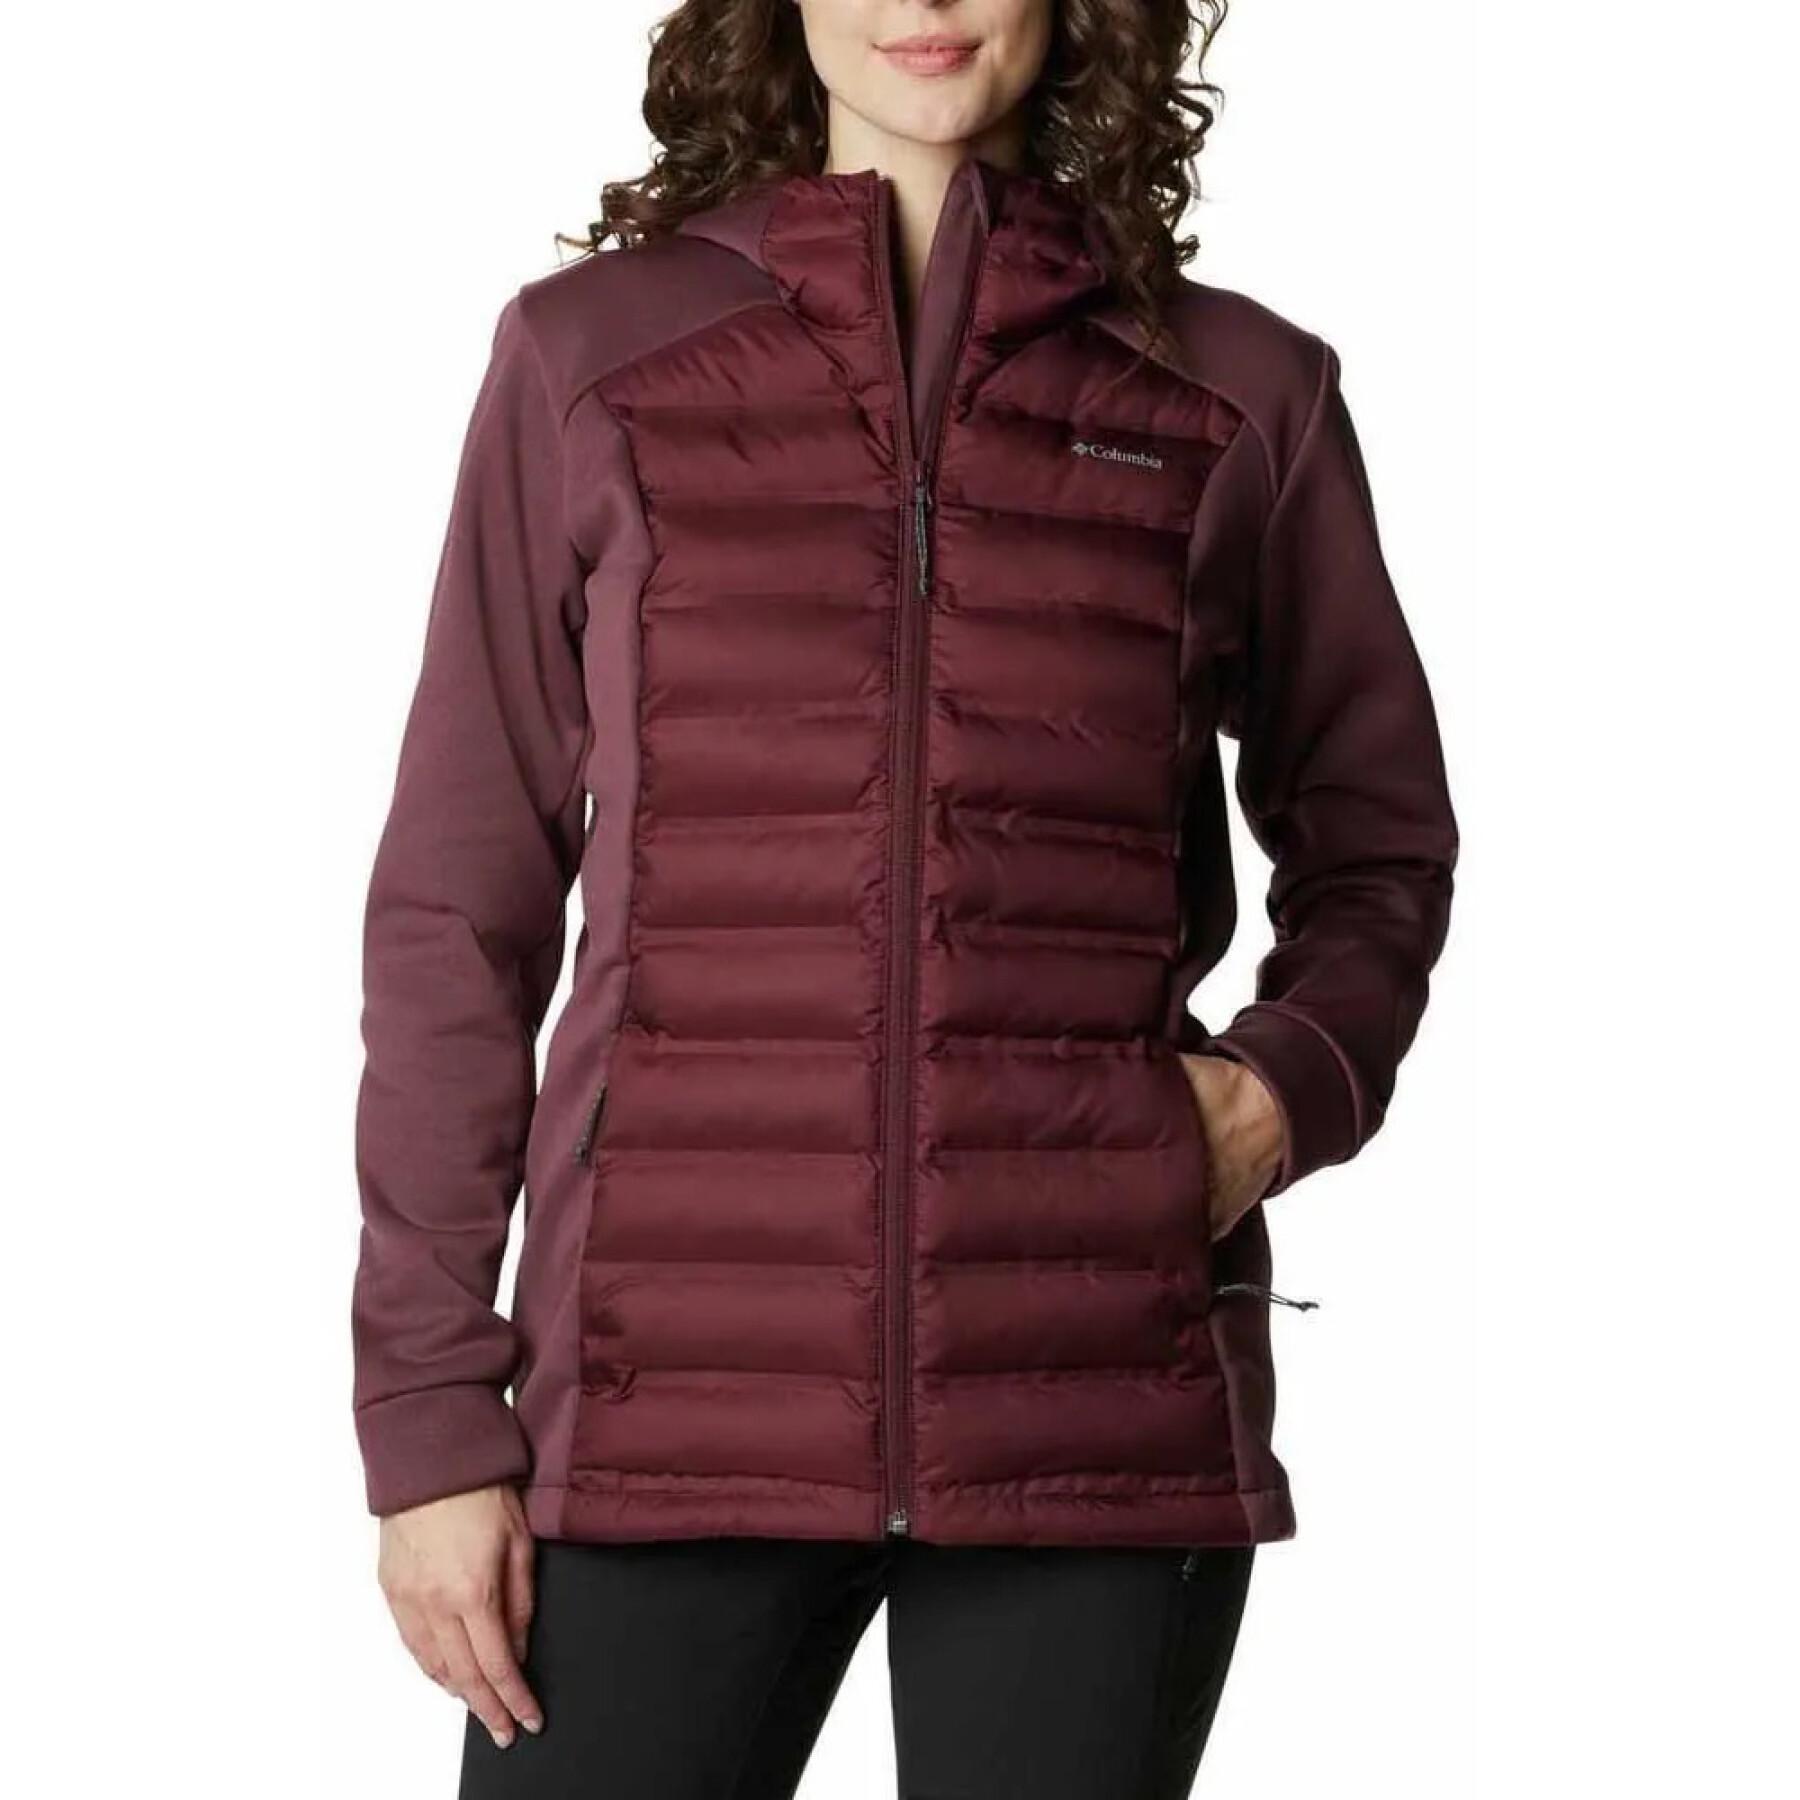 Women's hooded sweatshirt Columbia Out-Shield Insulated FZ